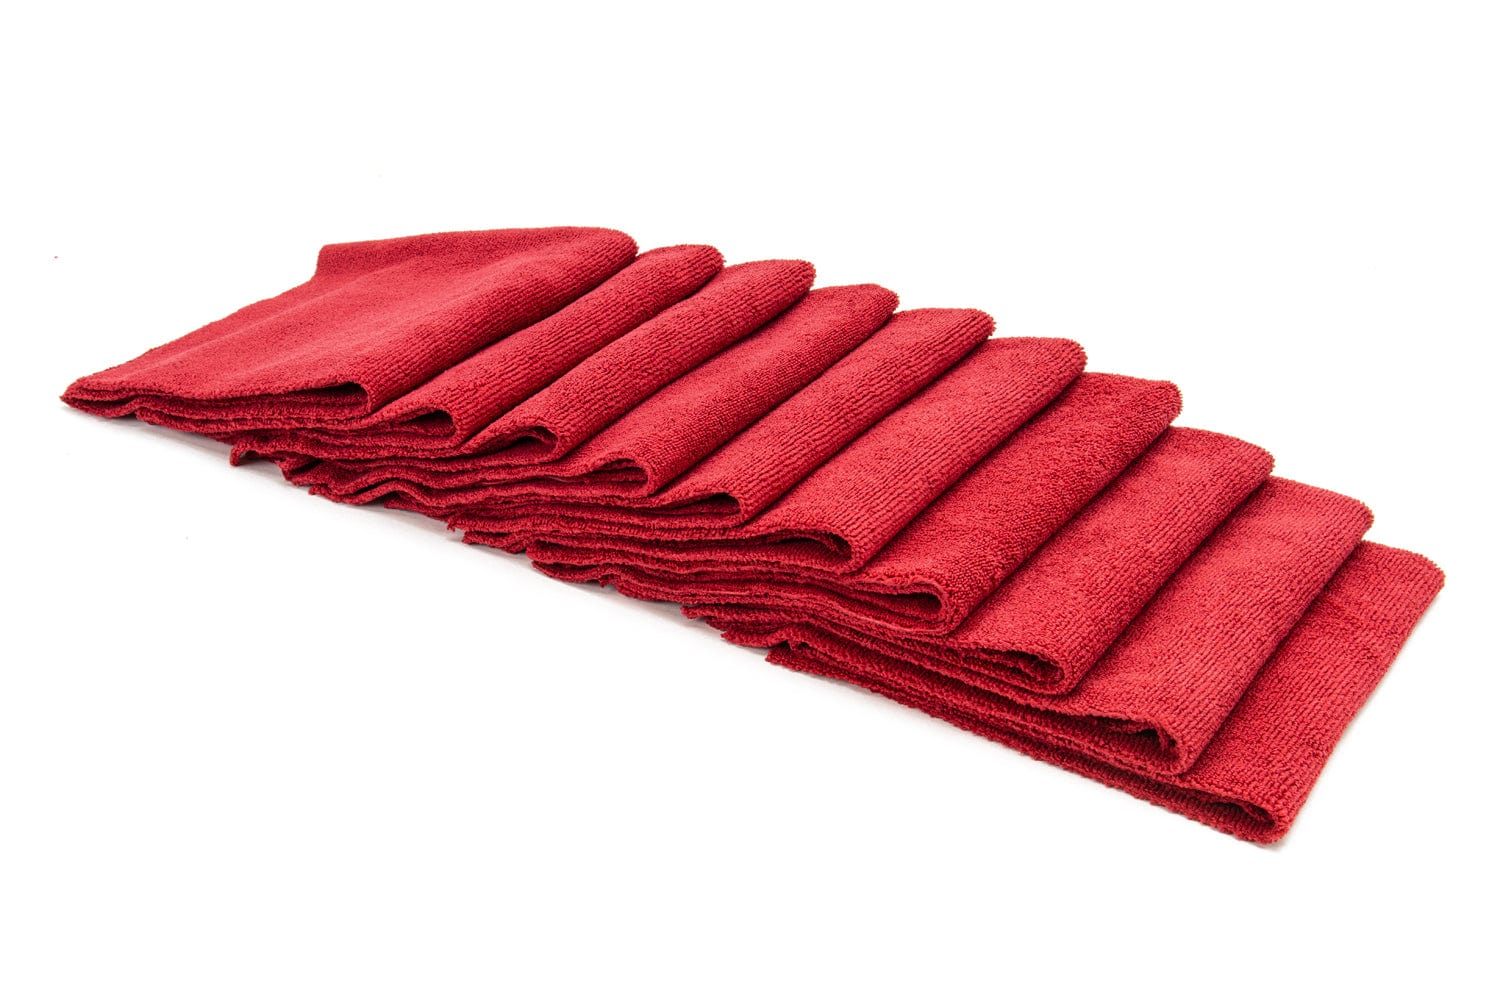 Autofiber Red / Stitched [Utility 300] All-Purpose Edgeless Microfiber Towel (16 in x 16 in., 300 gsm) 10pack